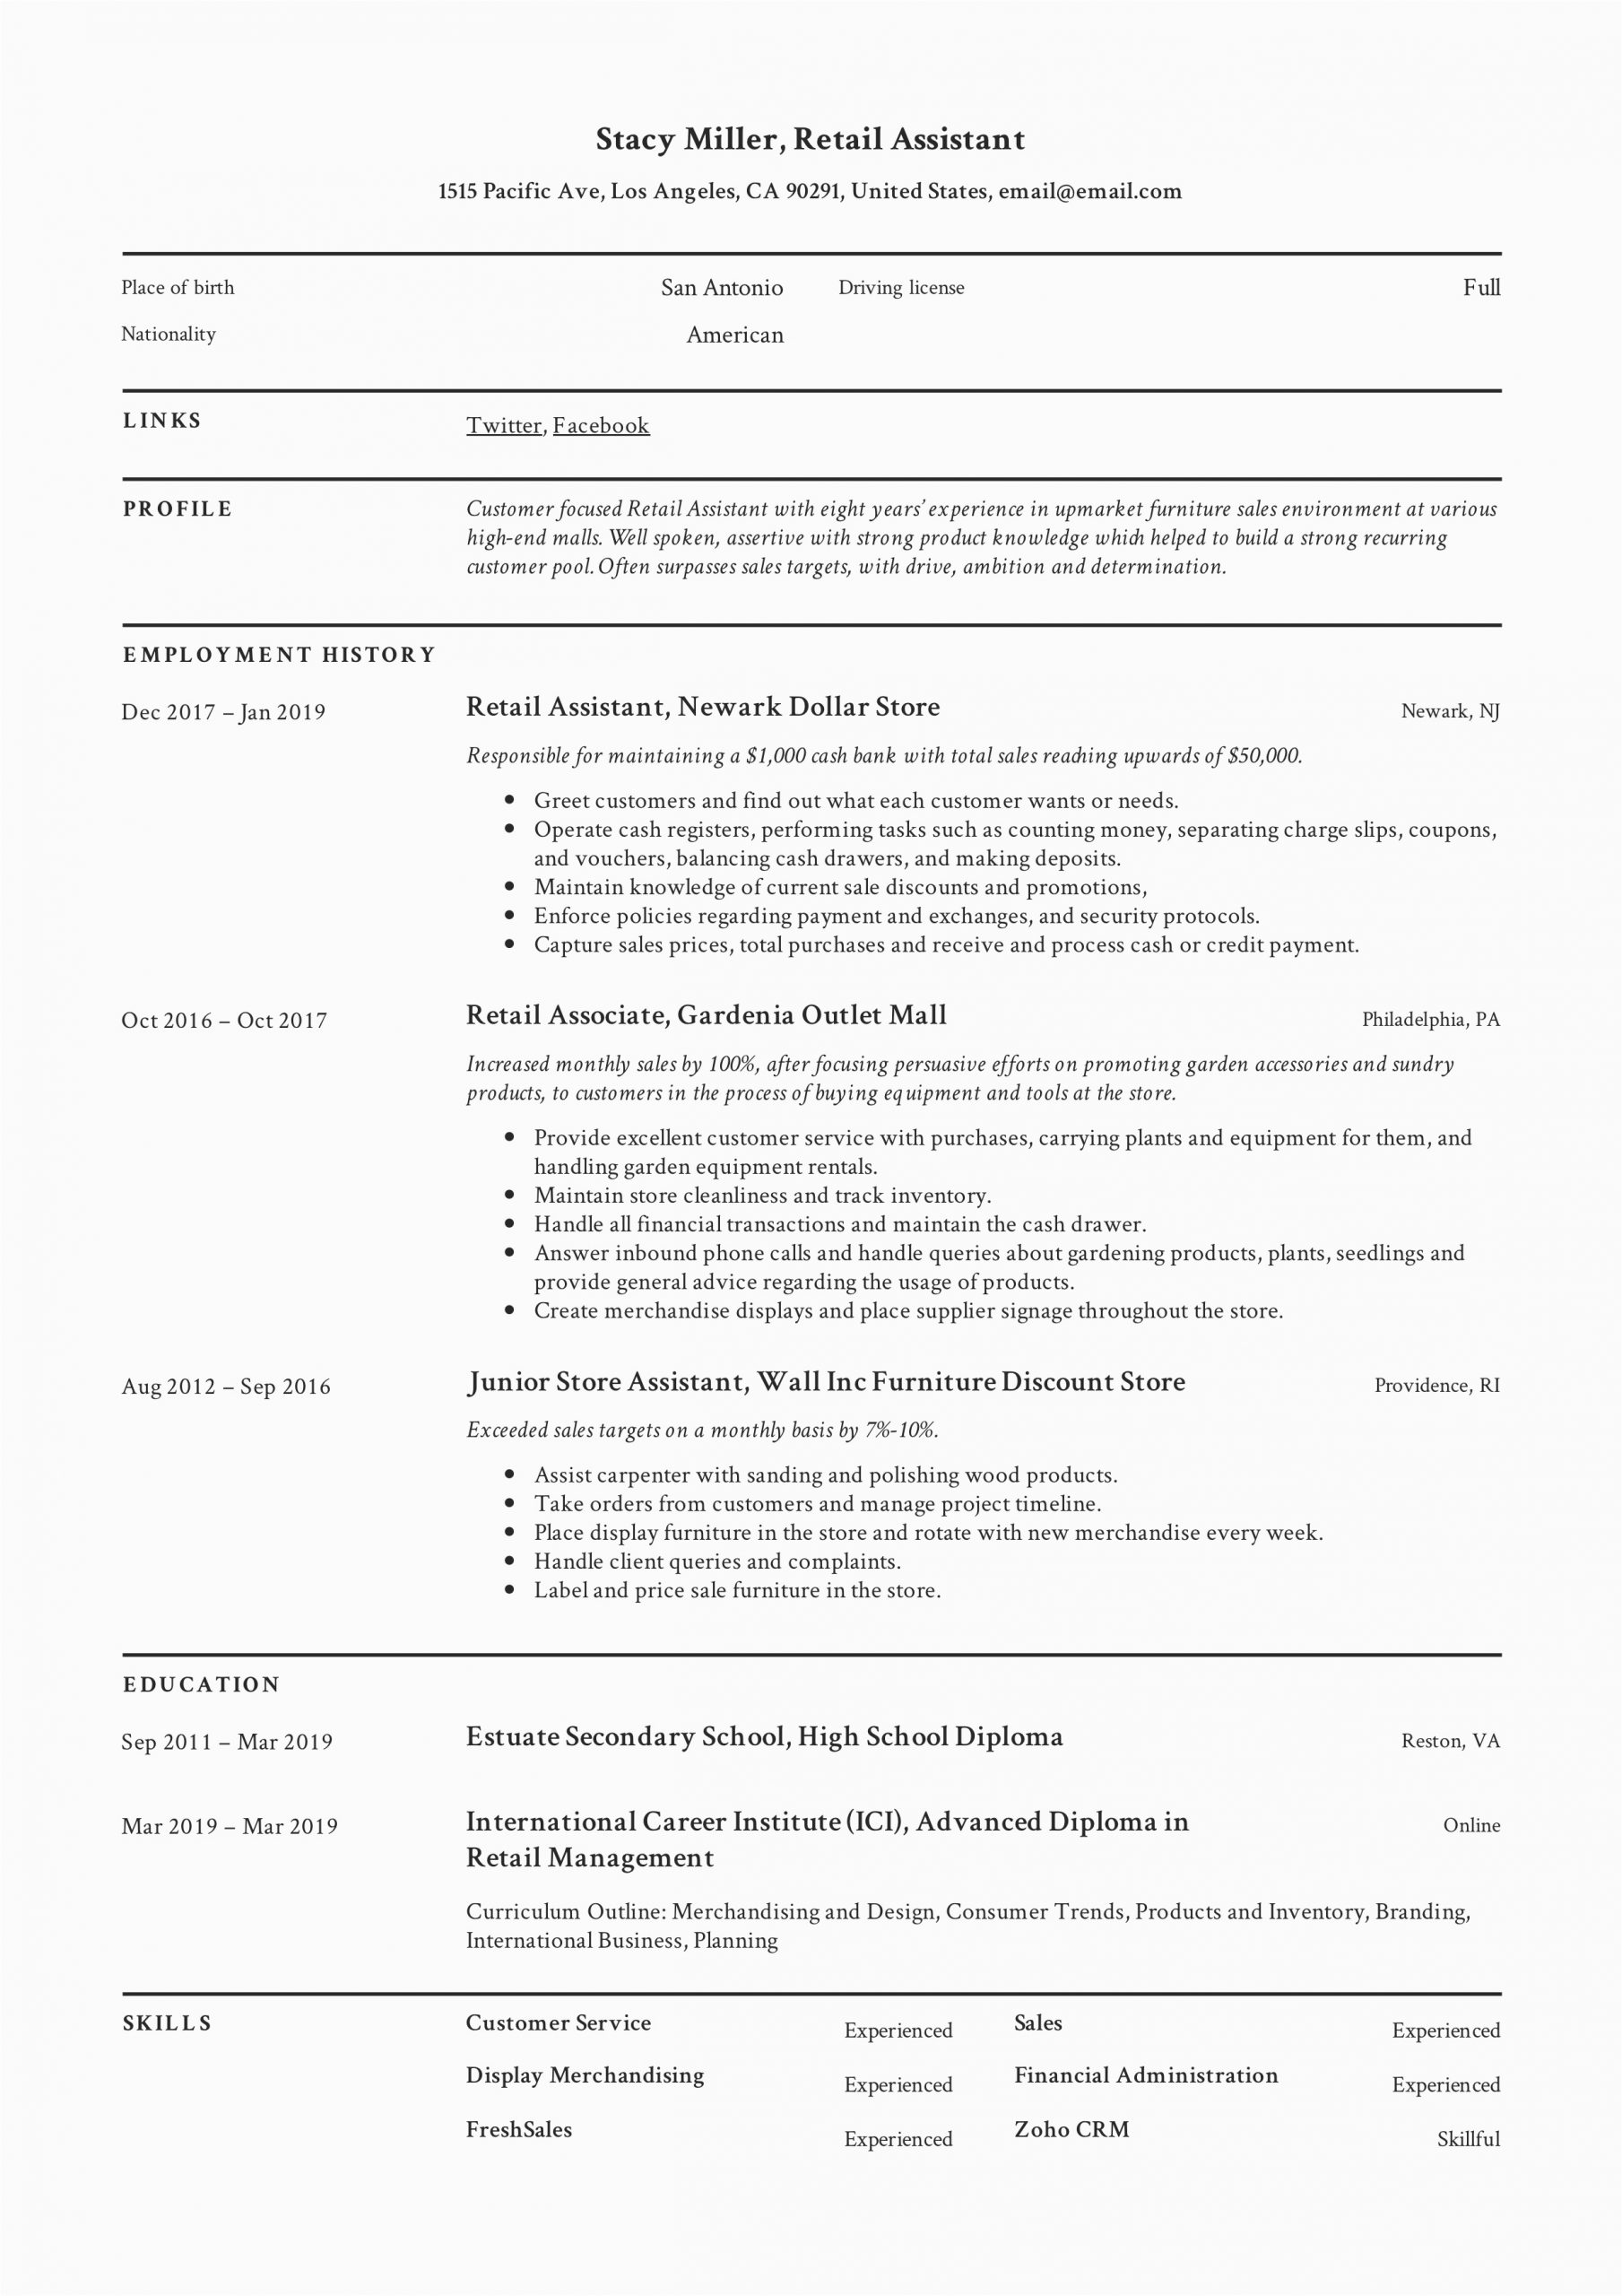 Sample Resume for Retail Shop assistant 12 Retail assistant Resume Samples & Writing Guide